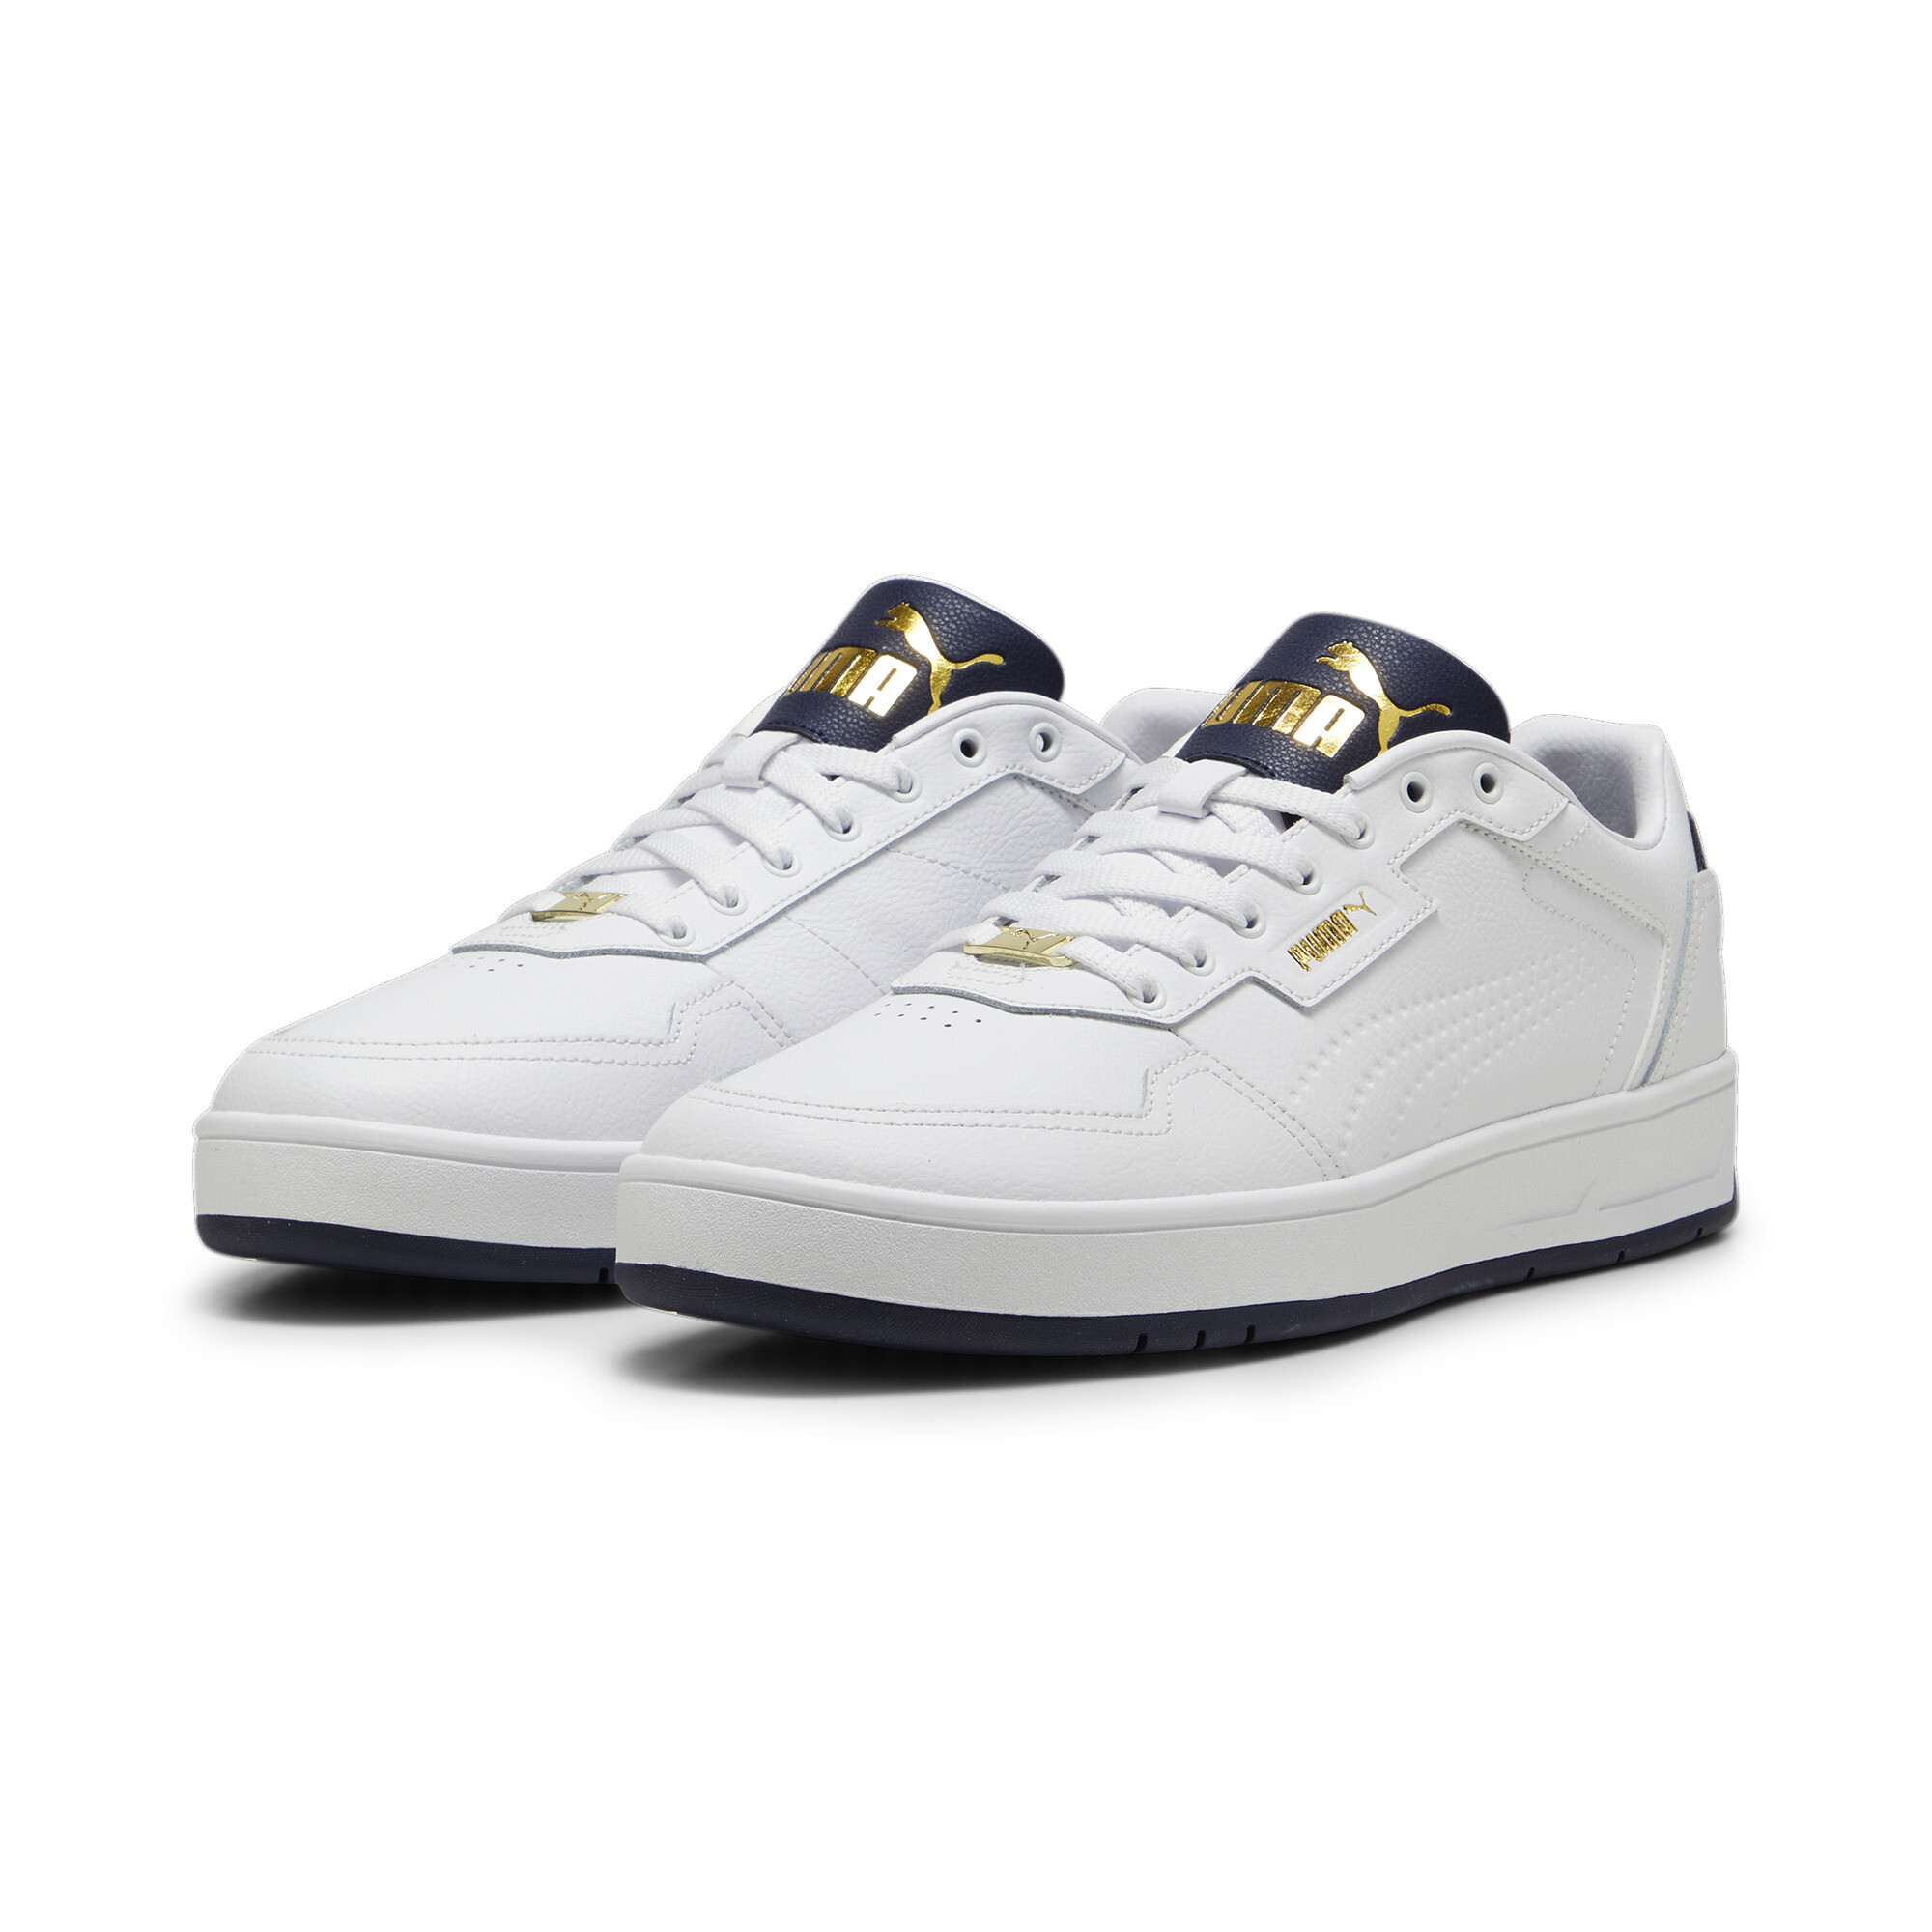 Puma Court Classic Lux Sneakers, White, Size 46, Shoes